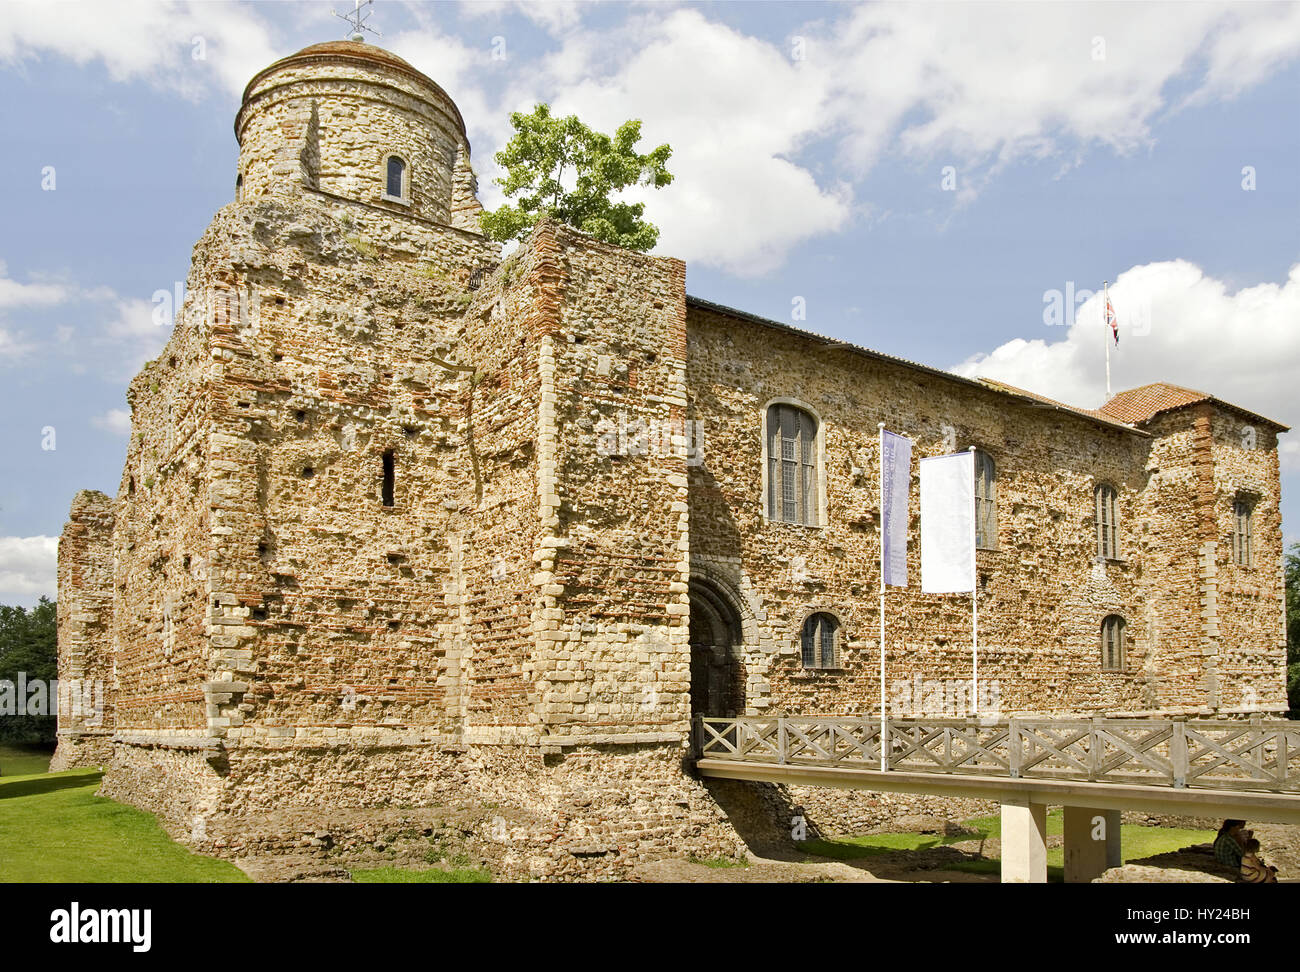 Colchester Castle in Colchester; Essex is an example of a largely complete Norman castle. The castle has had various uses since it ceased to be a Roya Stock Photo